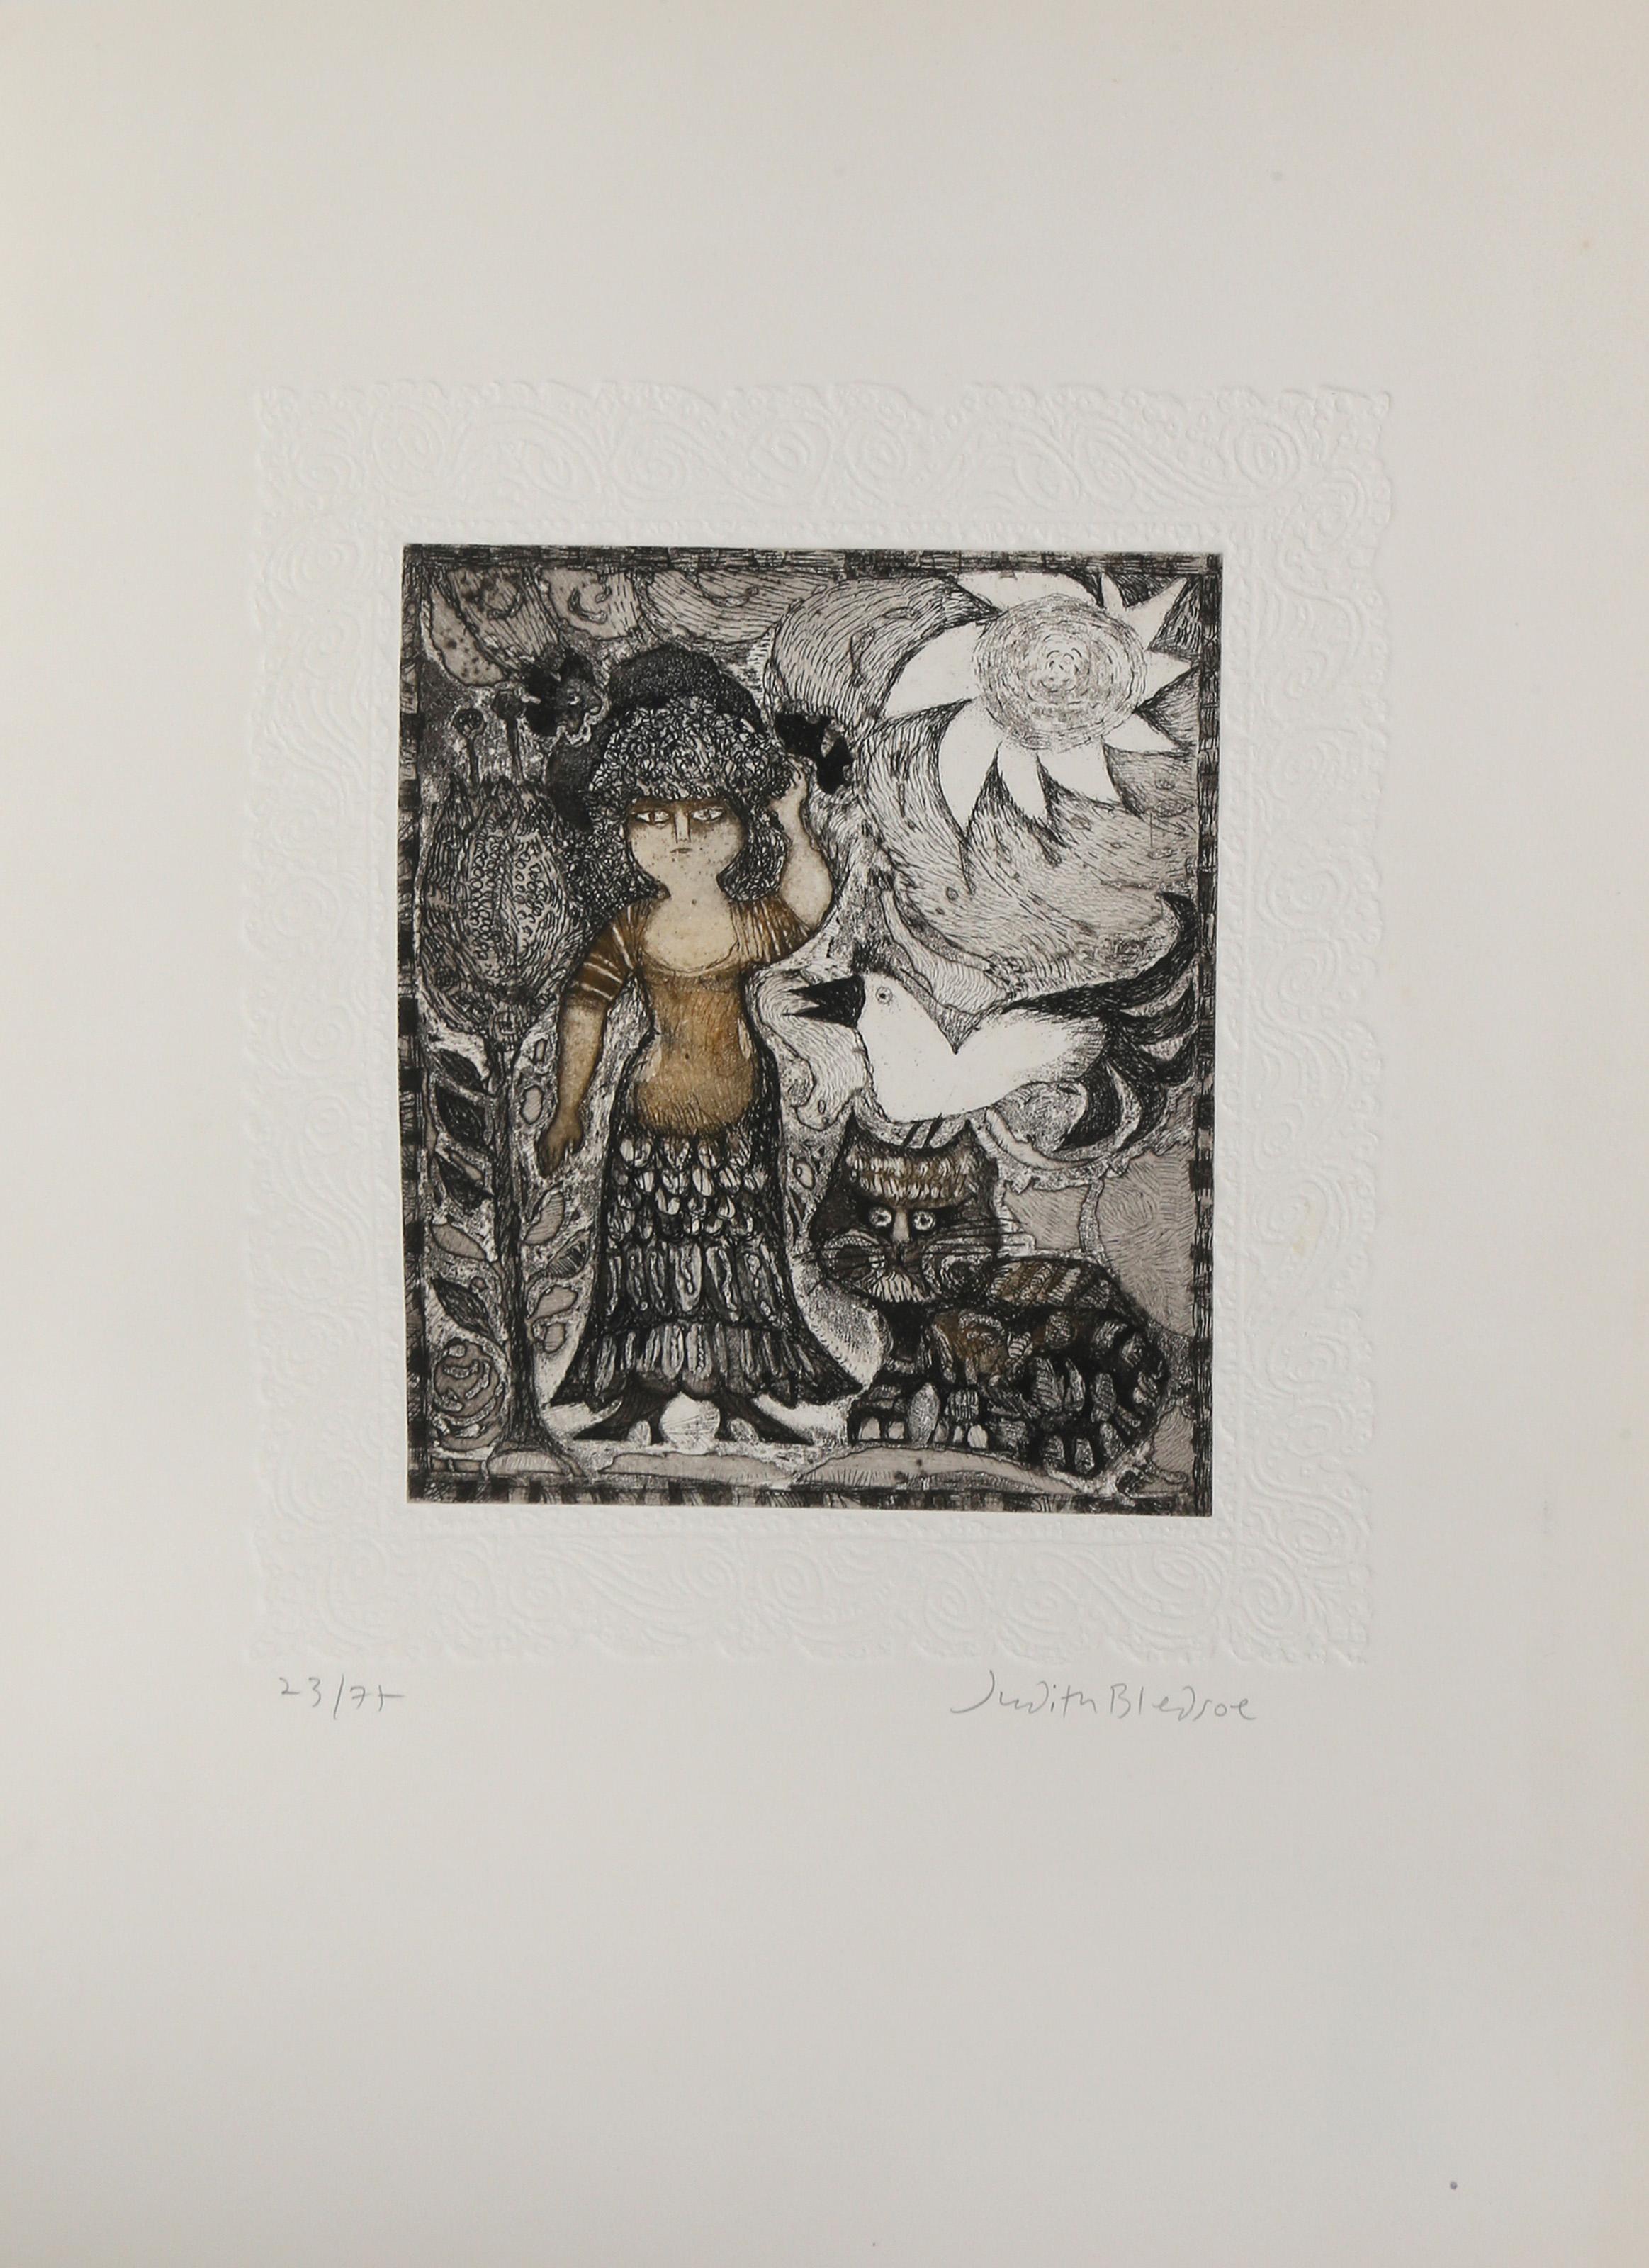 Judith Bledsoe, American (1938 - 2013) -  Windy Day with Cat and Bird. Year: circa 1980, Medium: Lithograph with Blind Embossing, signed and numbered in pencil, Edition: 23/75, Image Size: 9.5 x 8 inches, Size: 22 x 17 in. (55.88 x 43.18 cm),